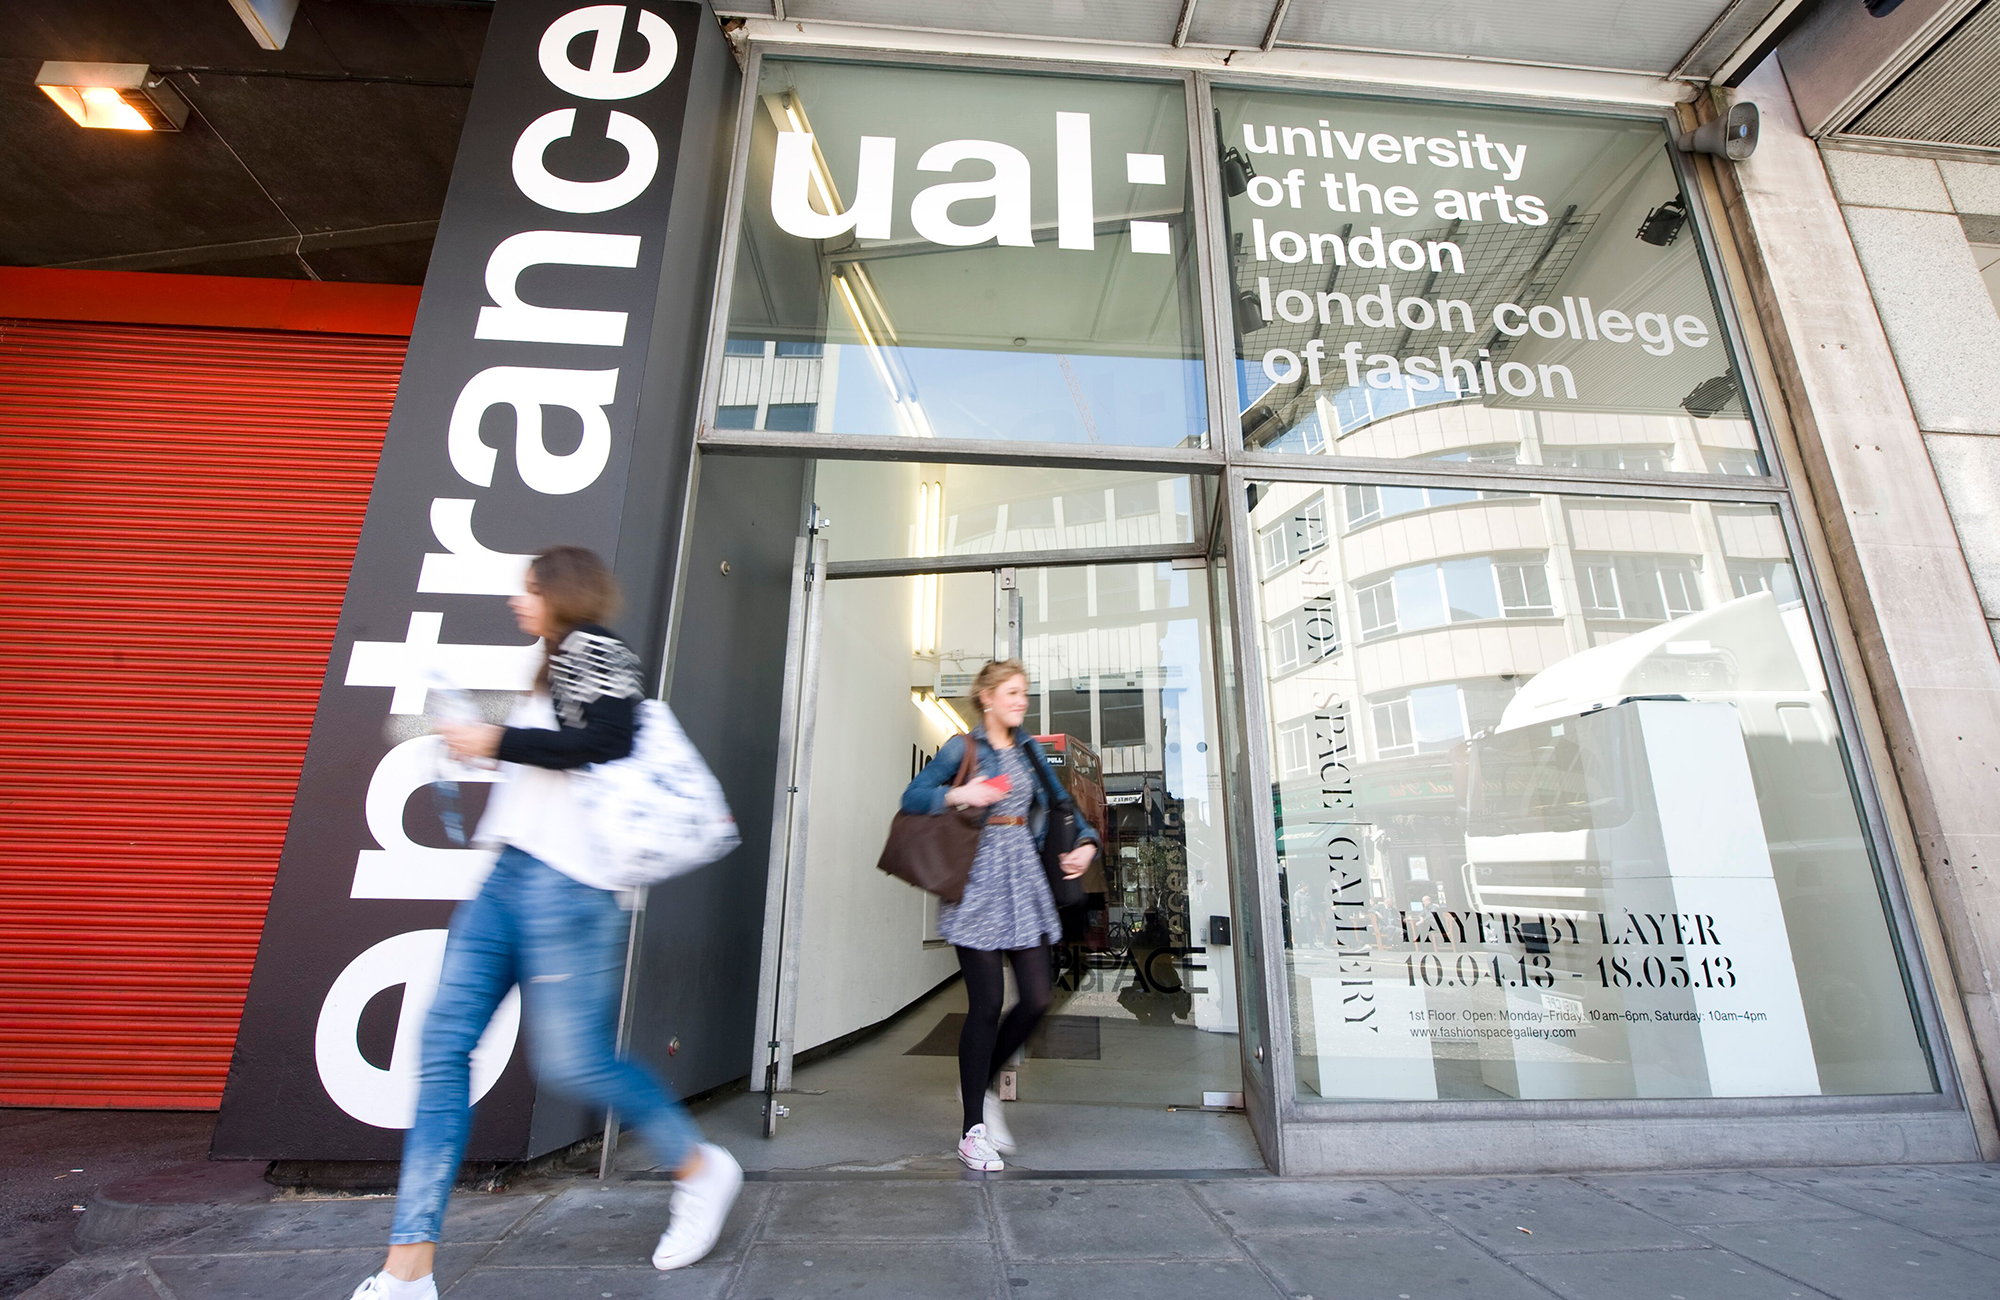 The entrance of University of the Arts London London College of fashion